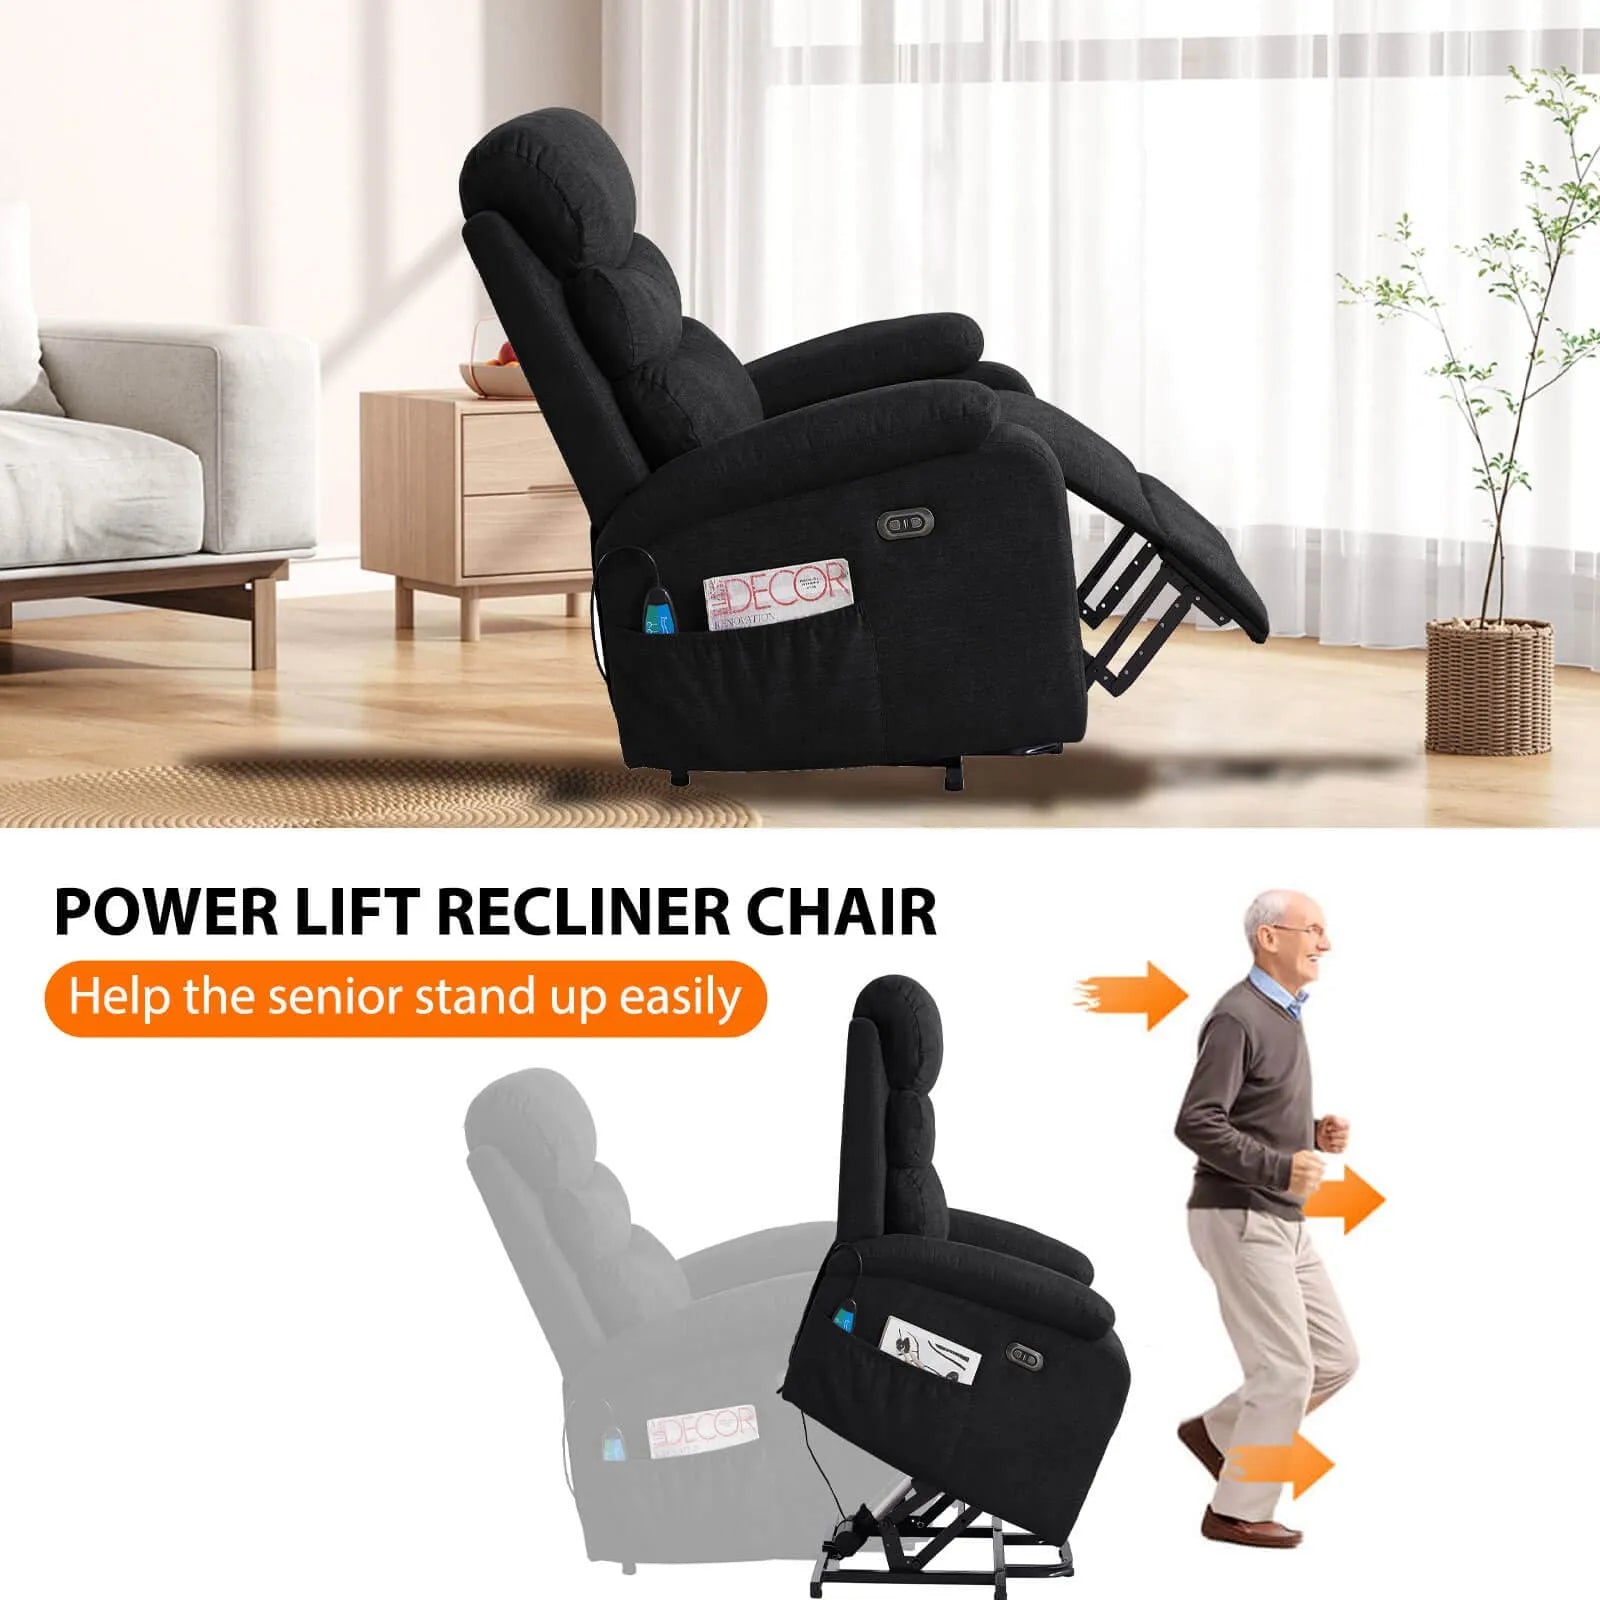 lift recliner chair that stands you up